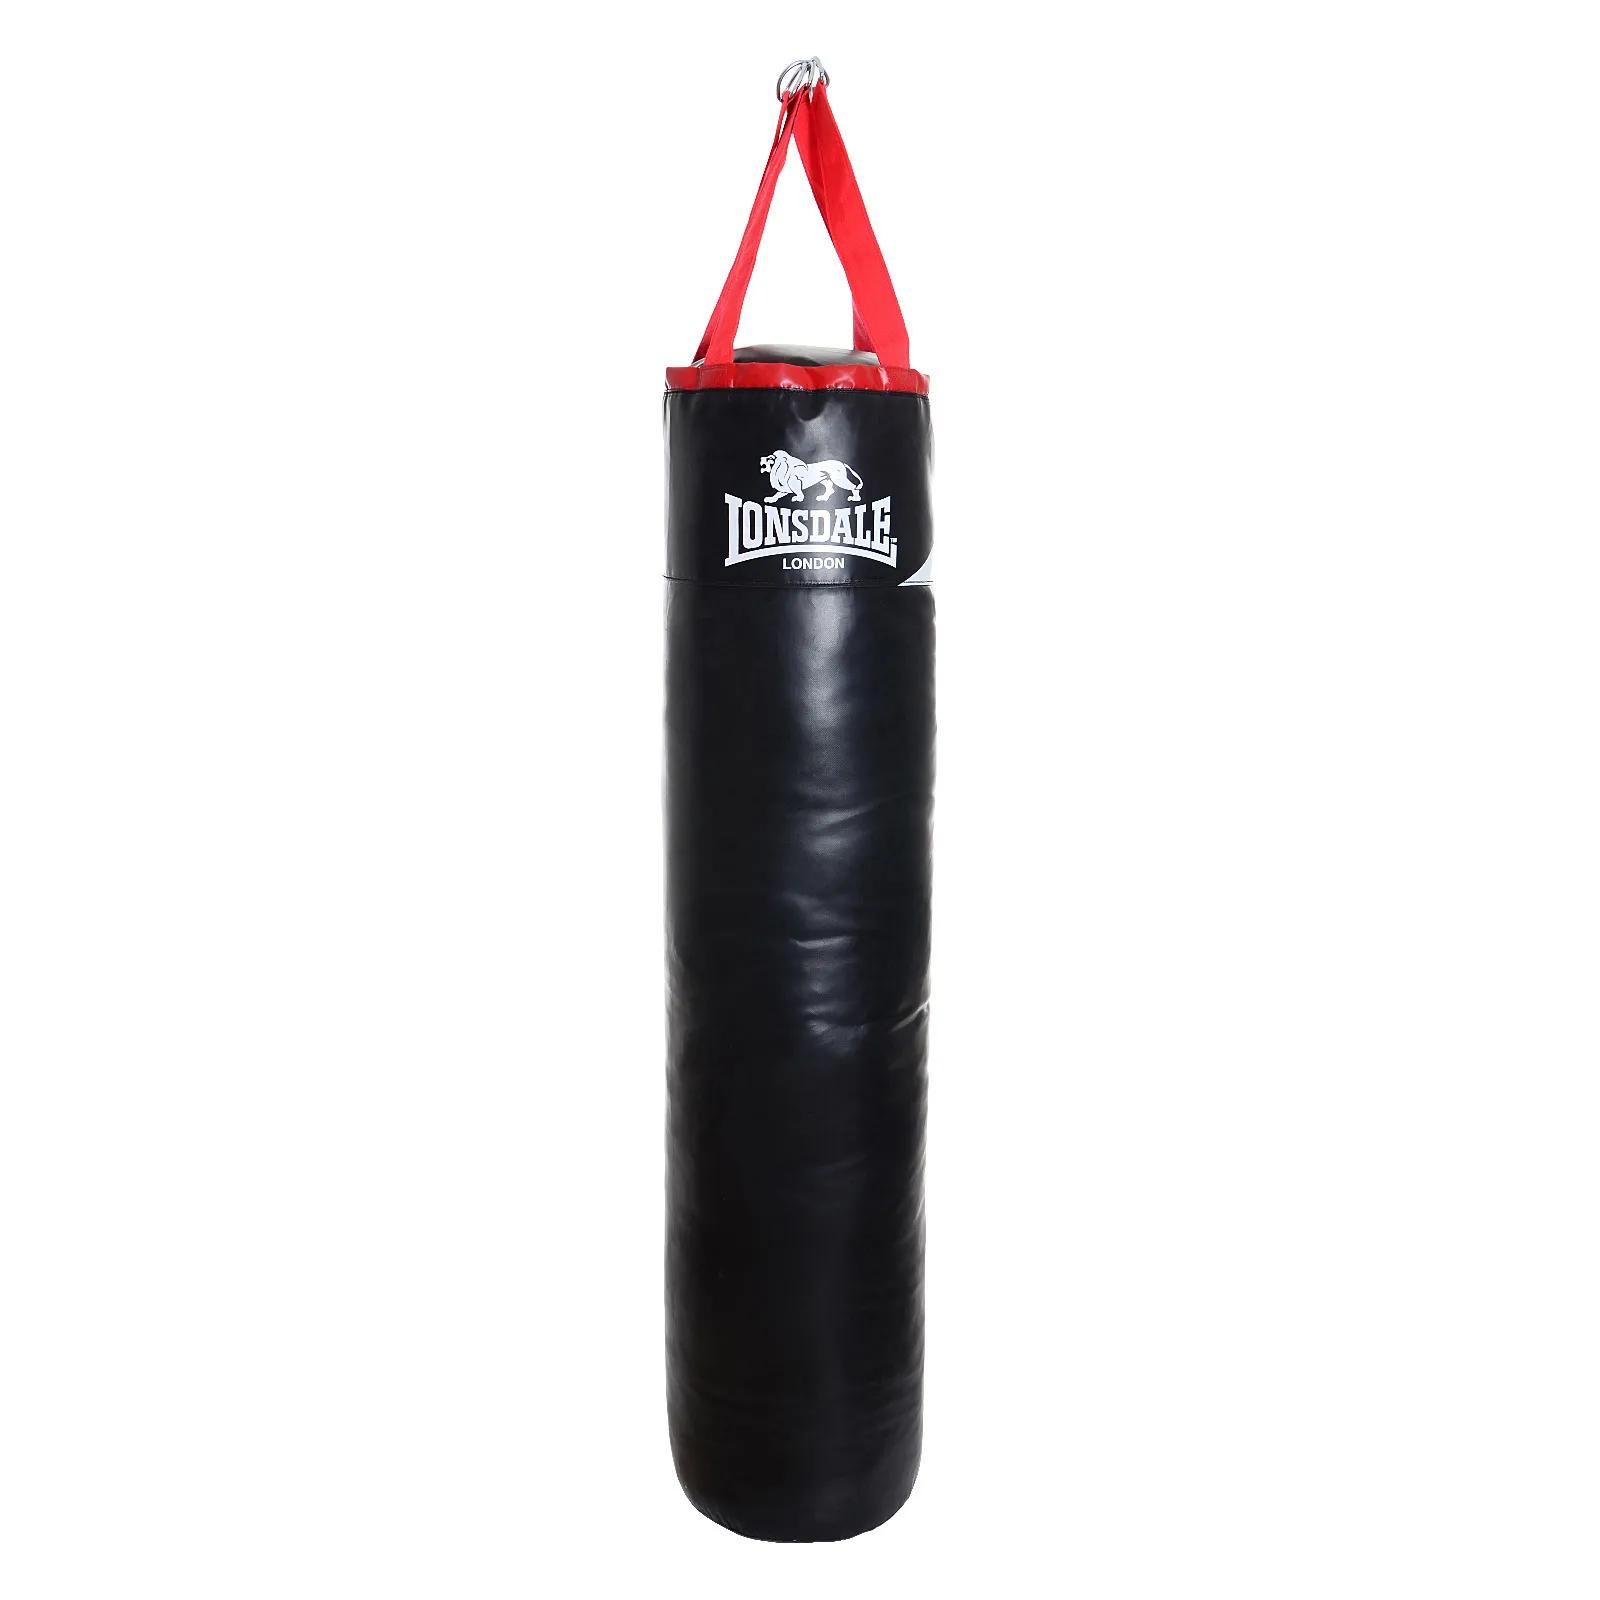 Lonsdale 5 FT PU PUNCH BAG 